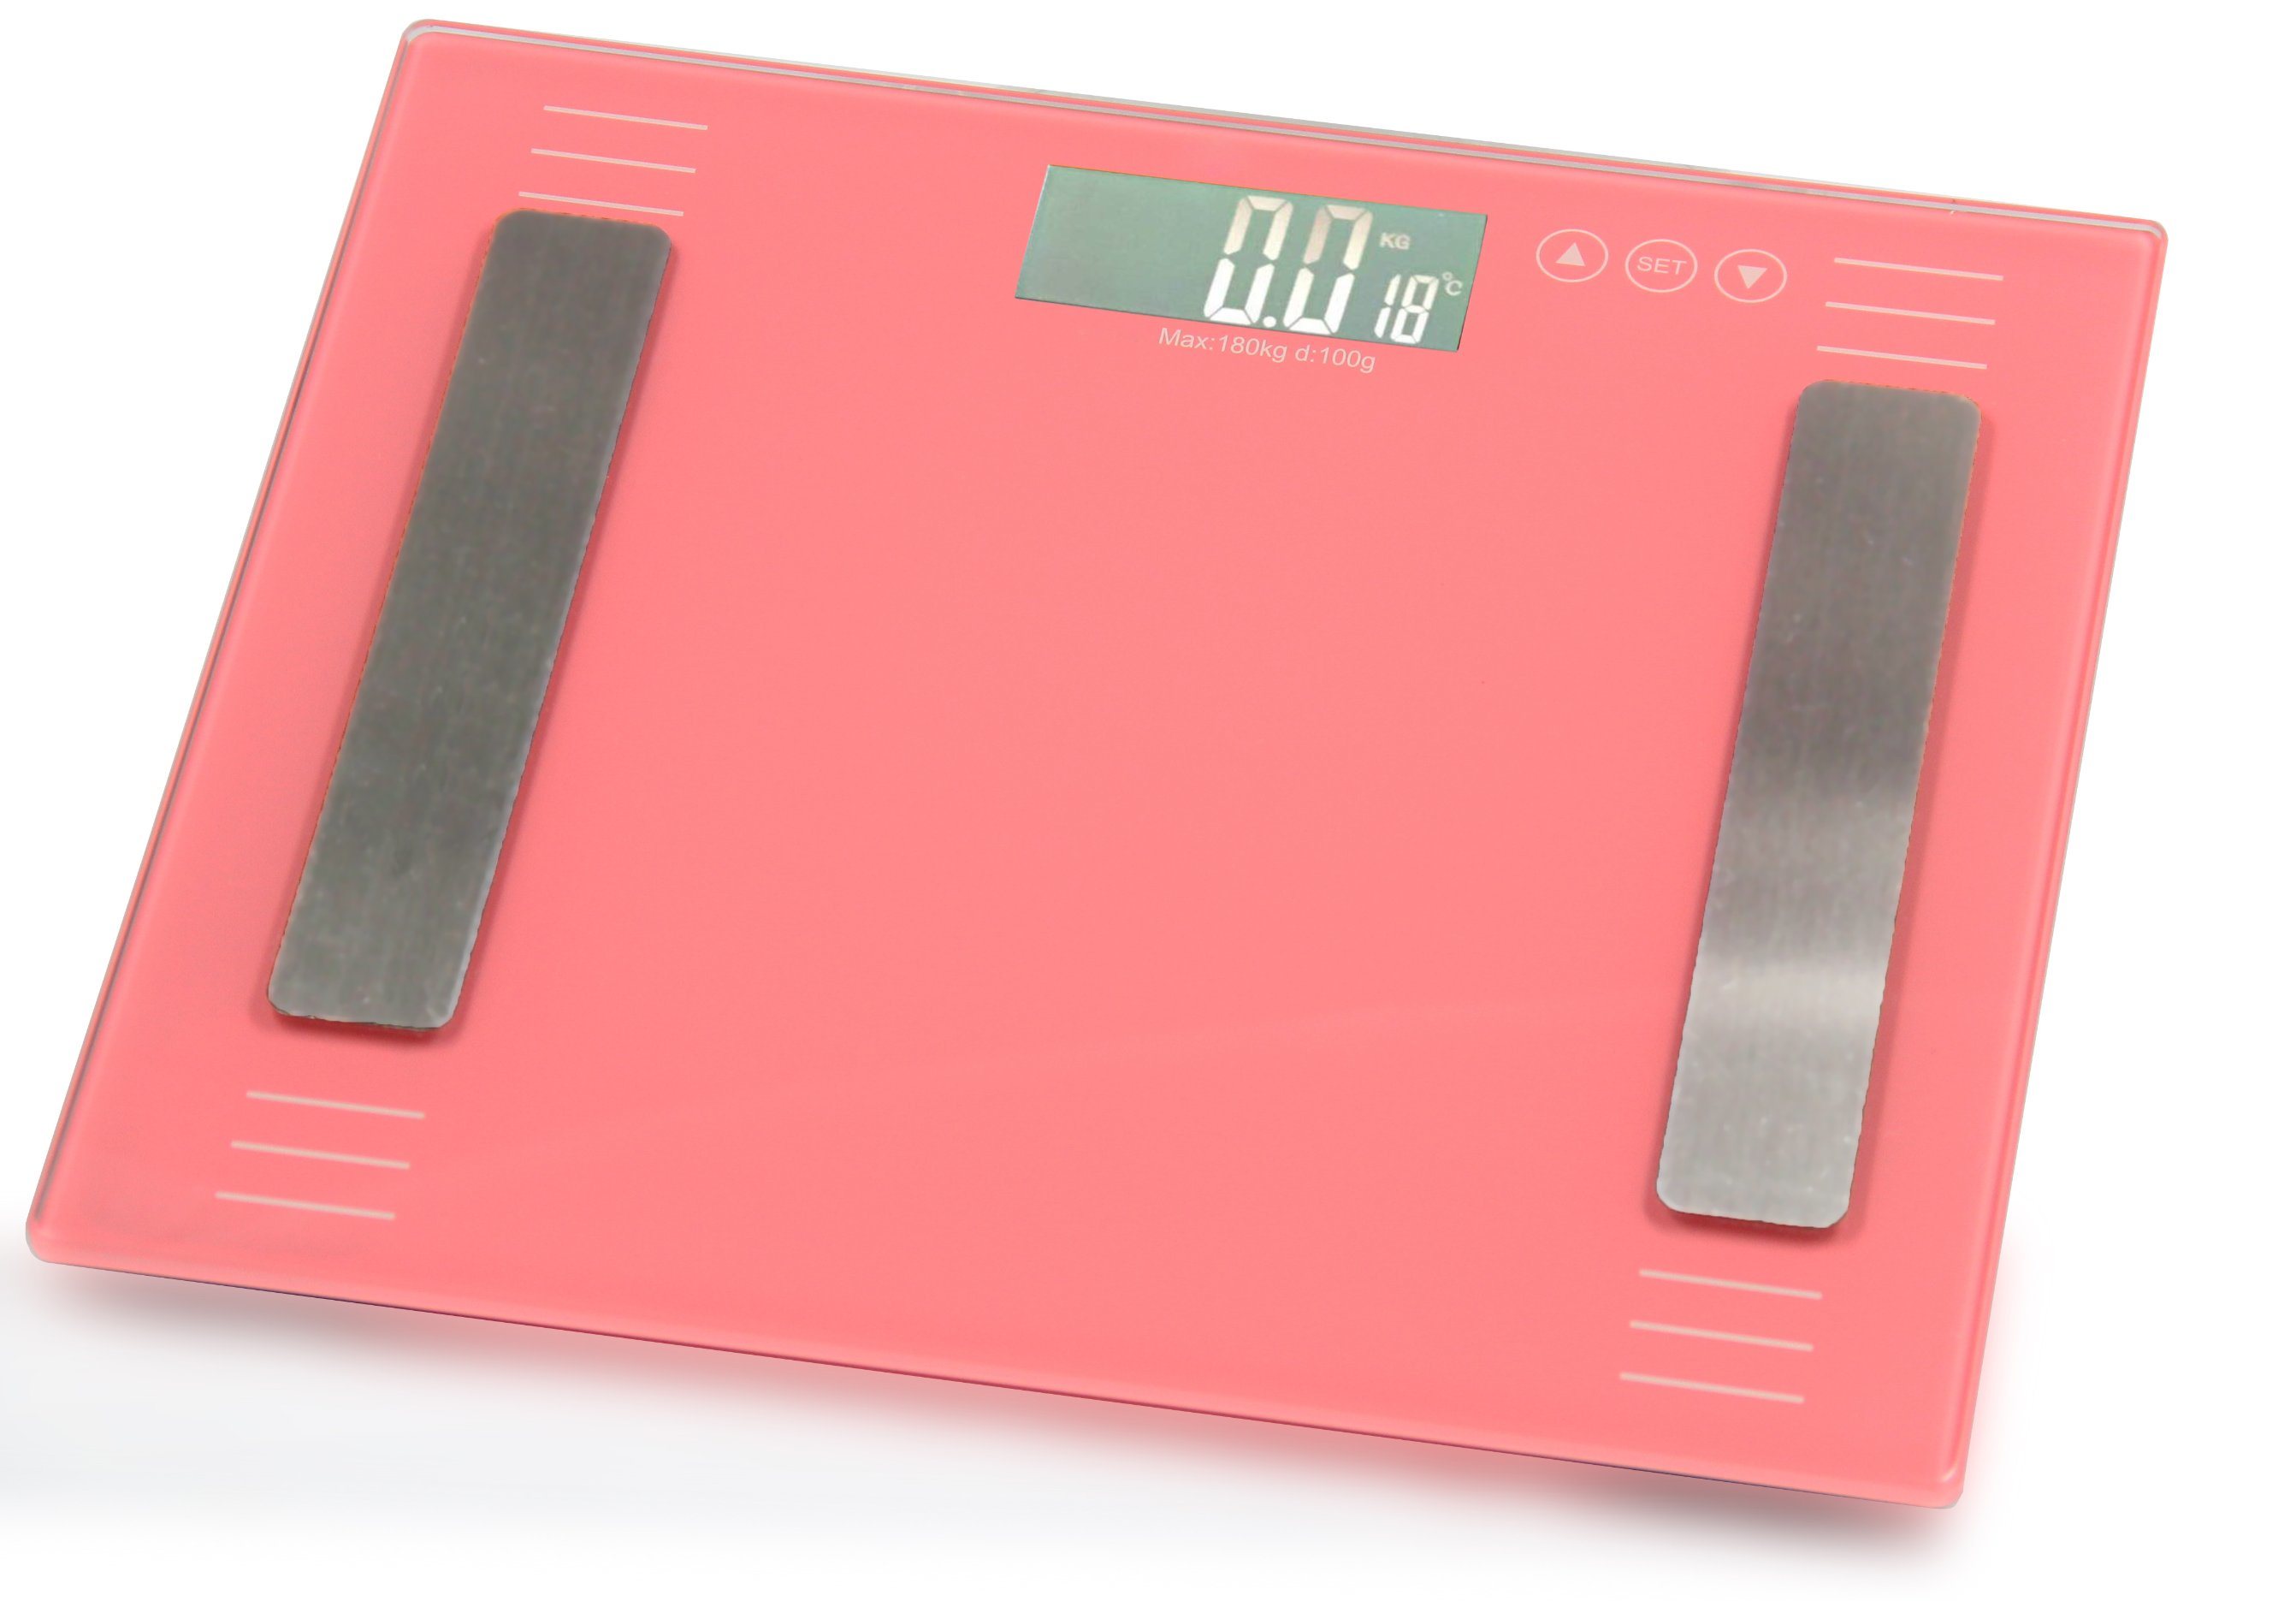 MS-BF130 Body Fat Scales